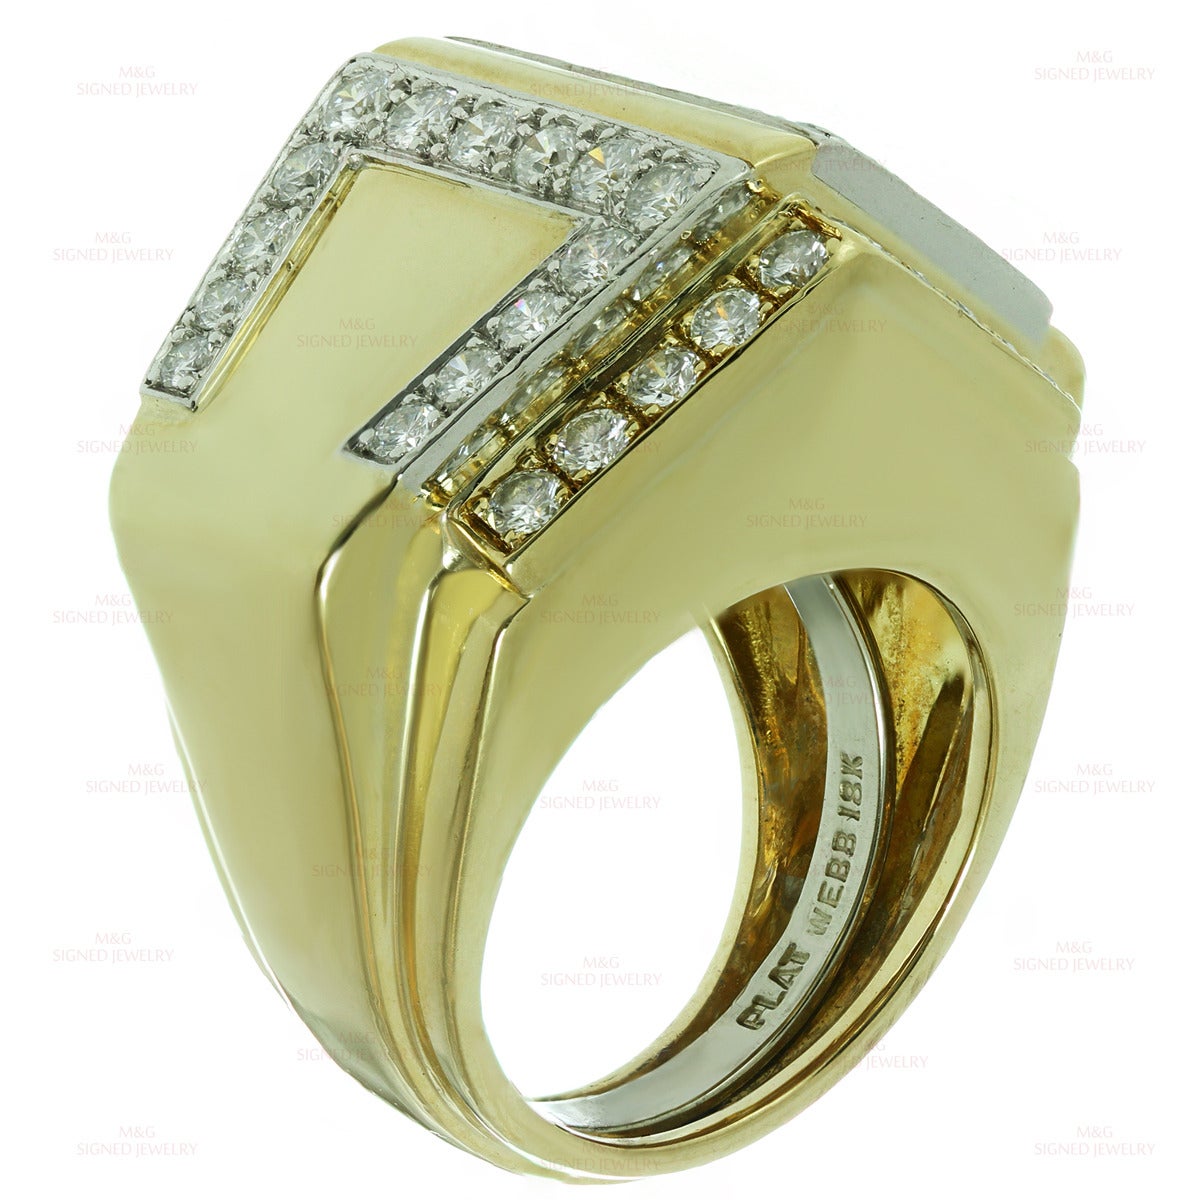 This chic geometric ring by David Webb is crafted in 18k yellow gold and set in fine platinum with round brilliant-cut E-F VVS2-VS1 diamonds of an estimated 2.0 carats. Made in United States circa 1990s. Measurements: 0.98